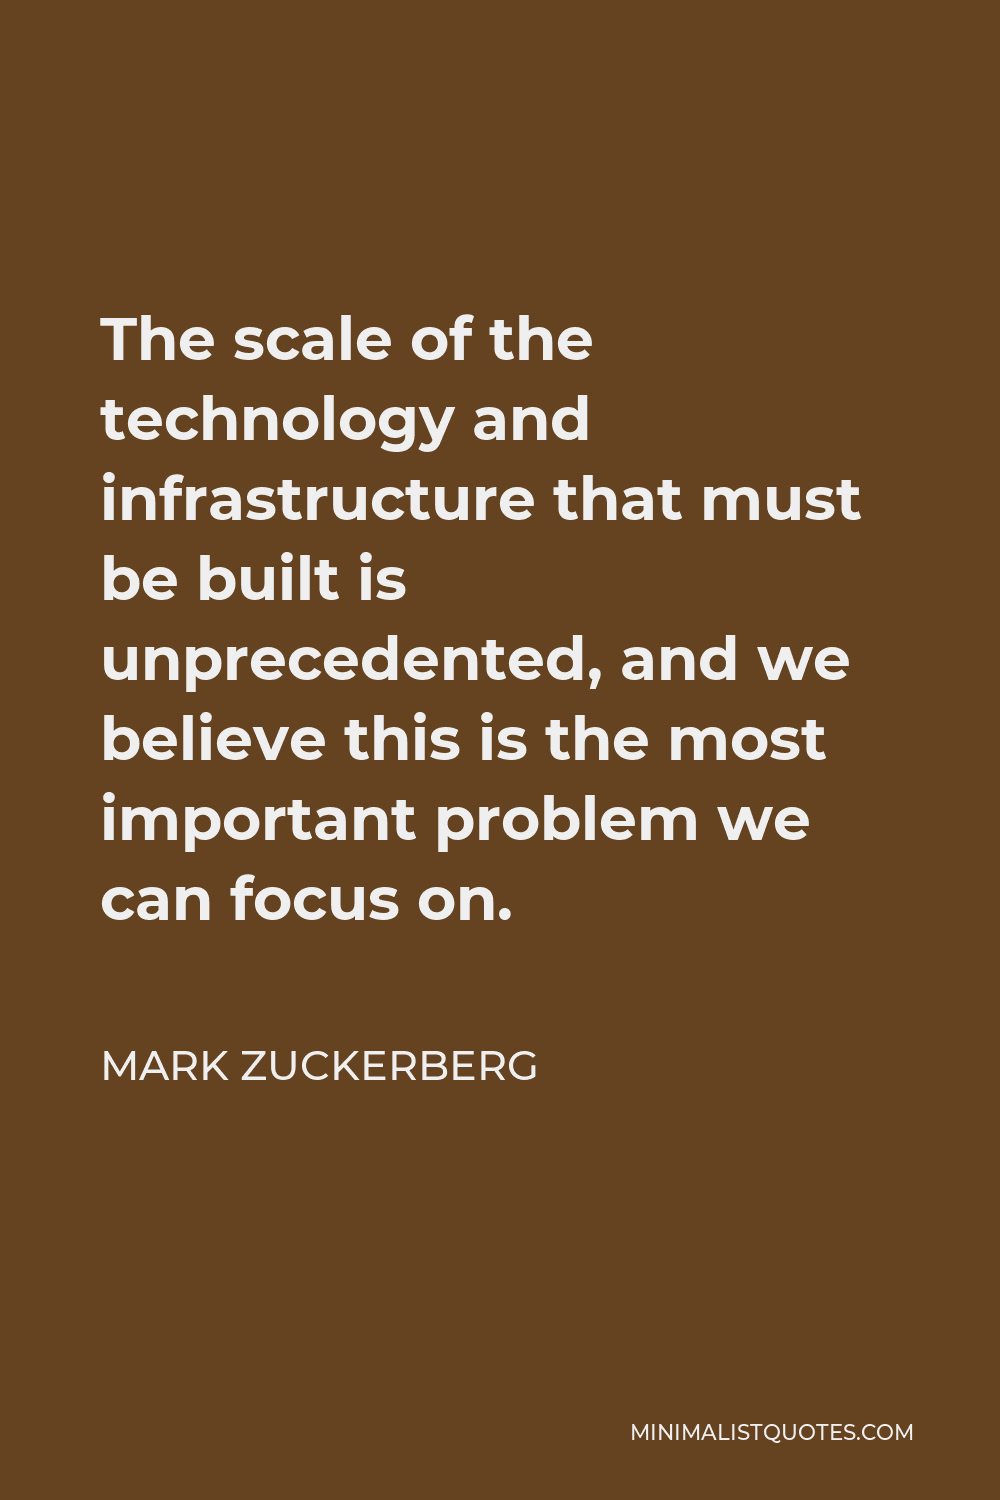 Mark Zuckerberg Quote - The scale of the technology and infrastructure that must be built is unprecedented, and we believe this is the most important problem we can focus on.